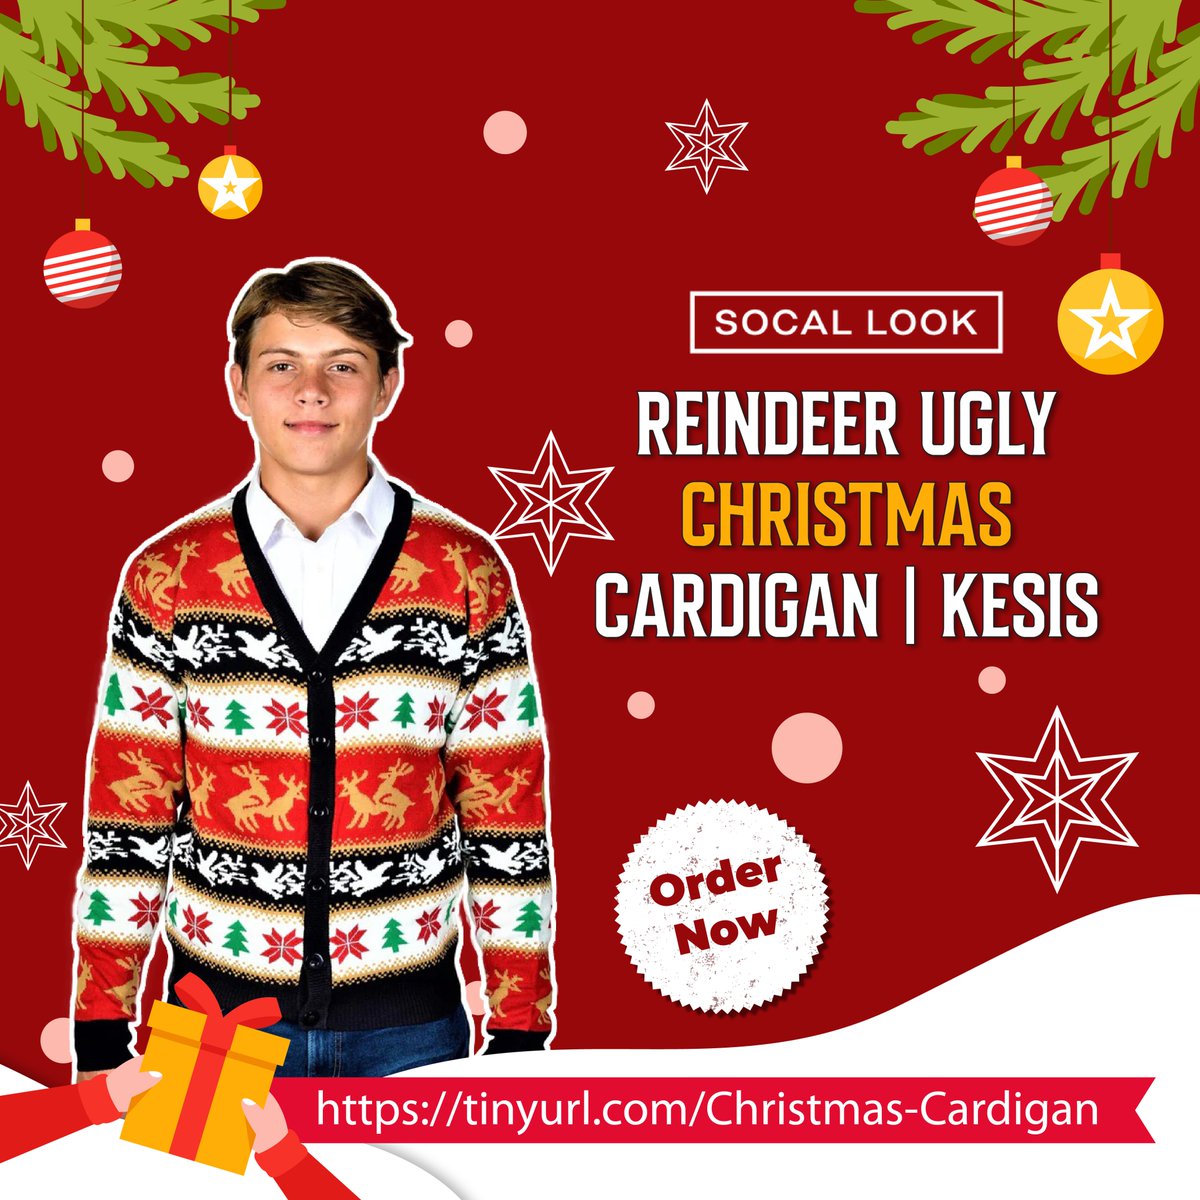 Get into the festive spirit with our Reindeer Ugly Christmas Cardigans! 🦌 Perfect for holiday parties and family gatherings.🎅🎉 Grab yours today and sleigh your holiday look! 👕 tinyurl.com/Christmas-Card… #HolidayStyle #ChristmasFun #UglyChristmasCardigan #ReindeerCardigan #Kesis